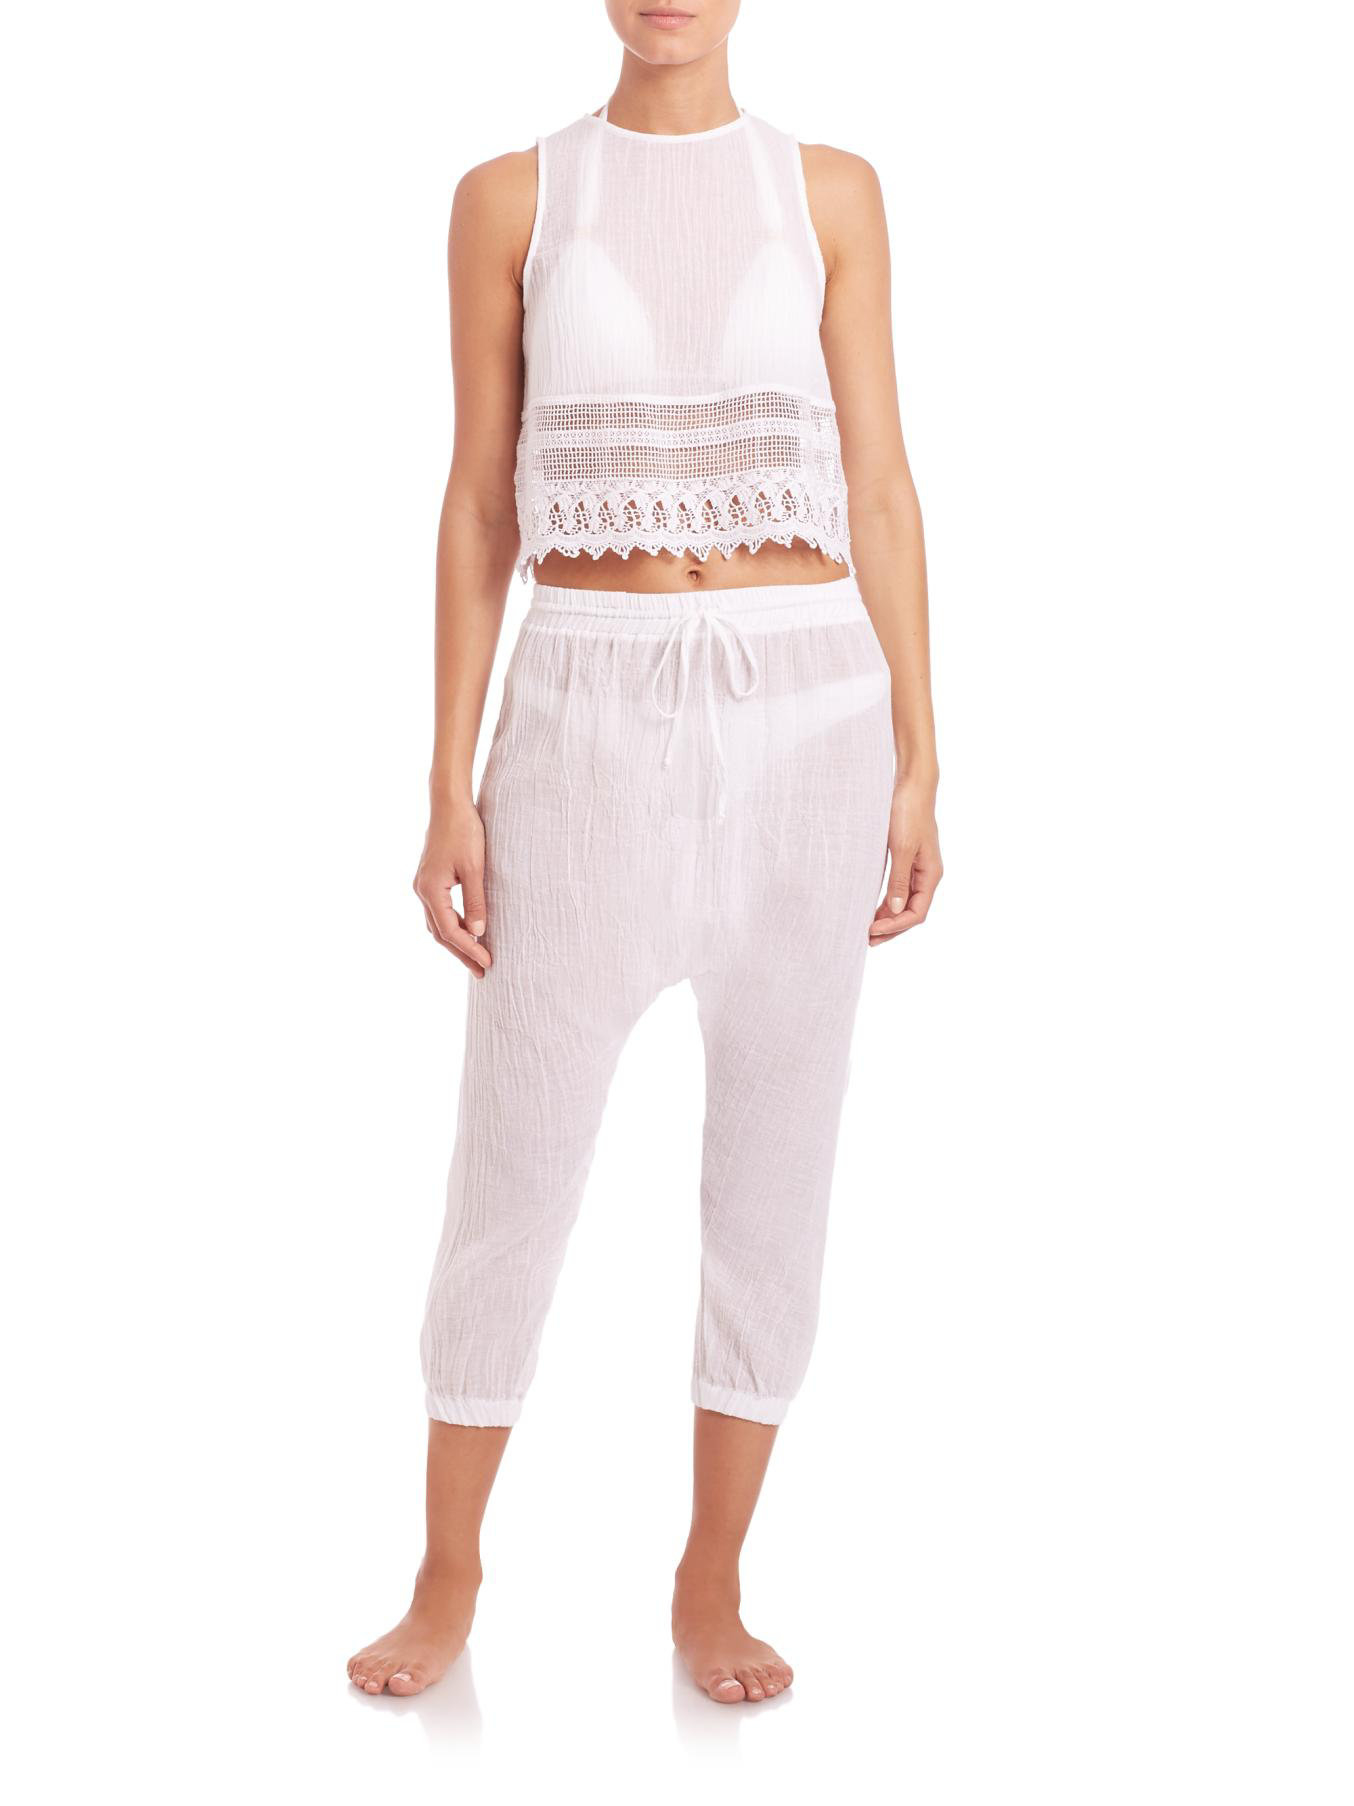 Miguelina Avery Cotton Harem Pants in White - Lyst